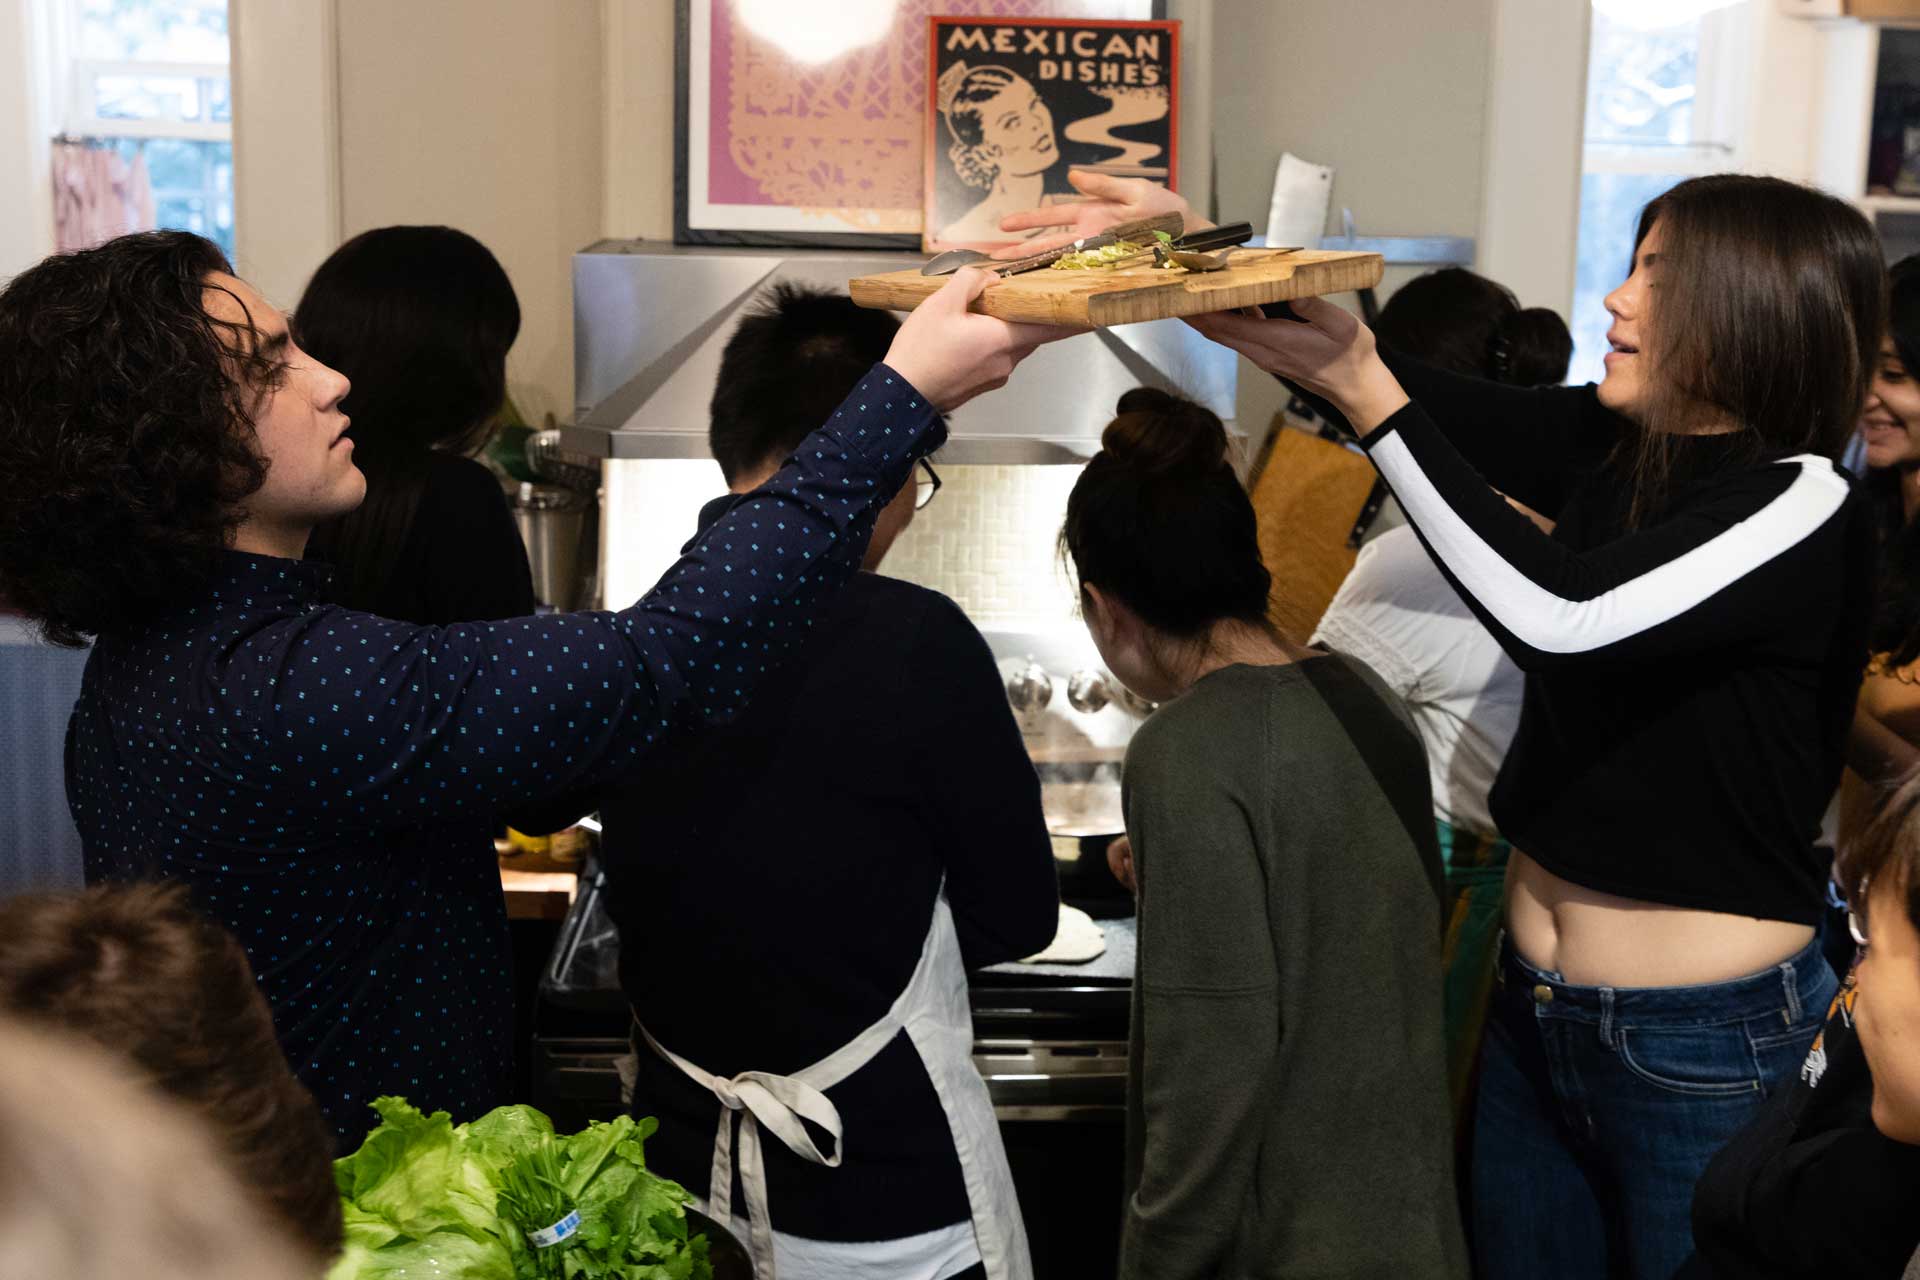 A group of student preparing food together in a kitchen